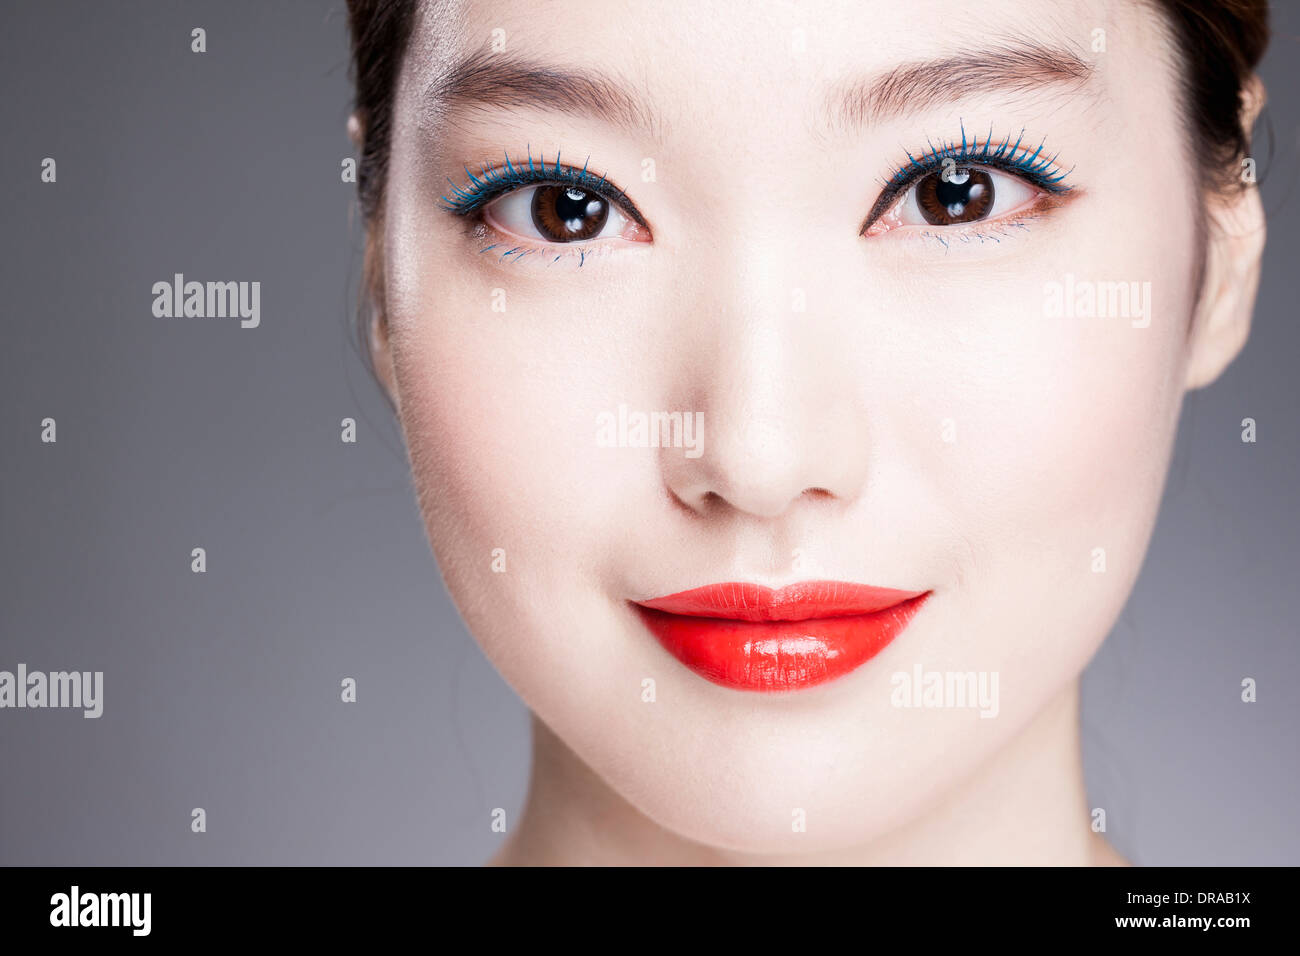 close up shot of a woman with red lipstick Stock Photo